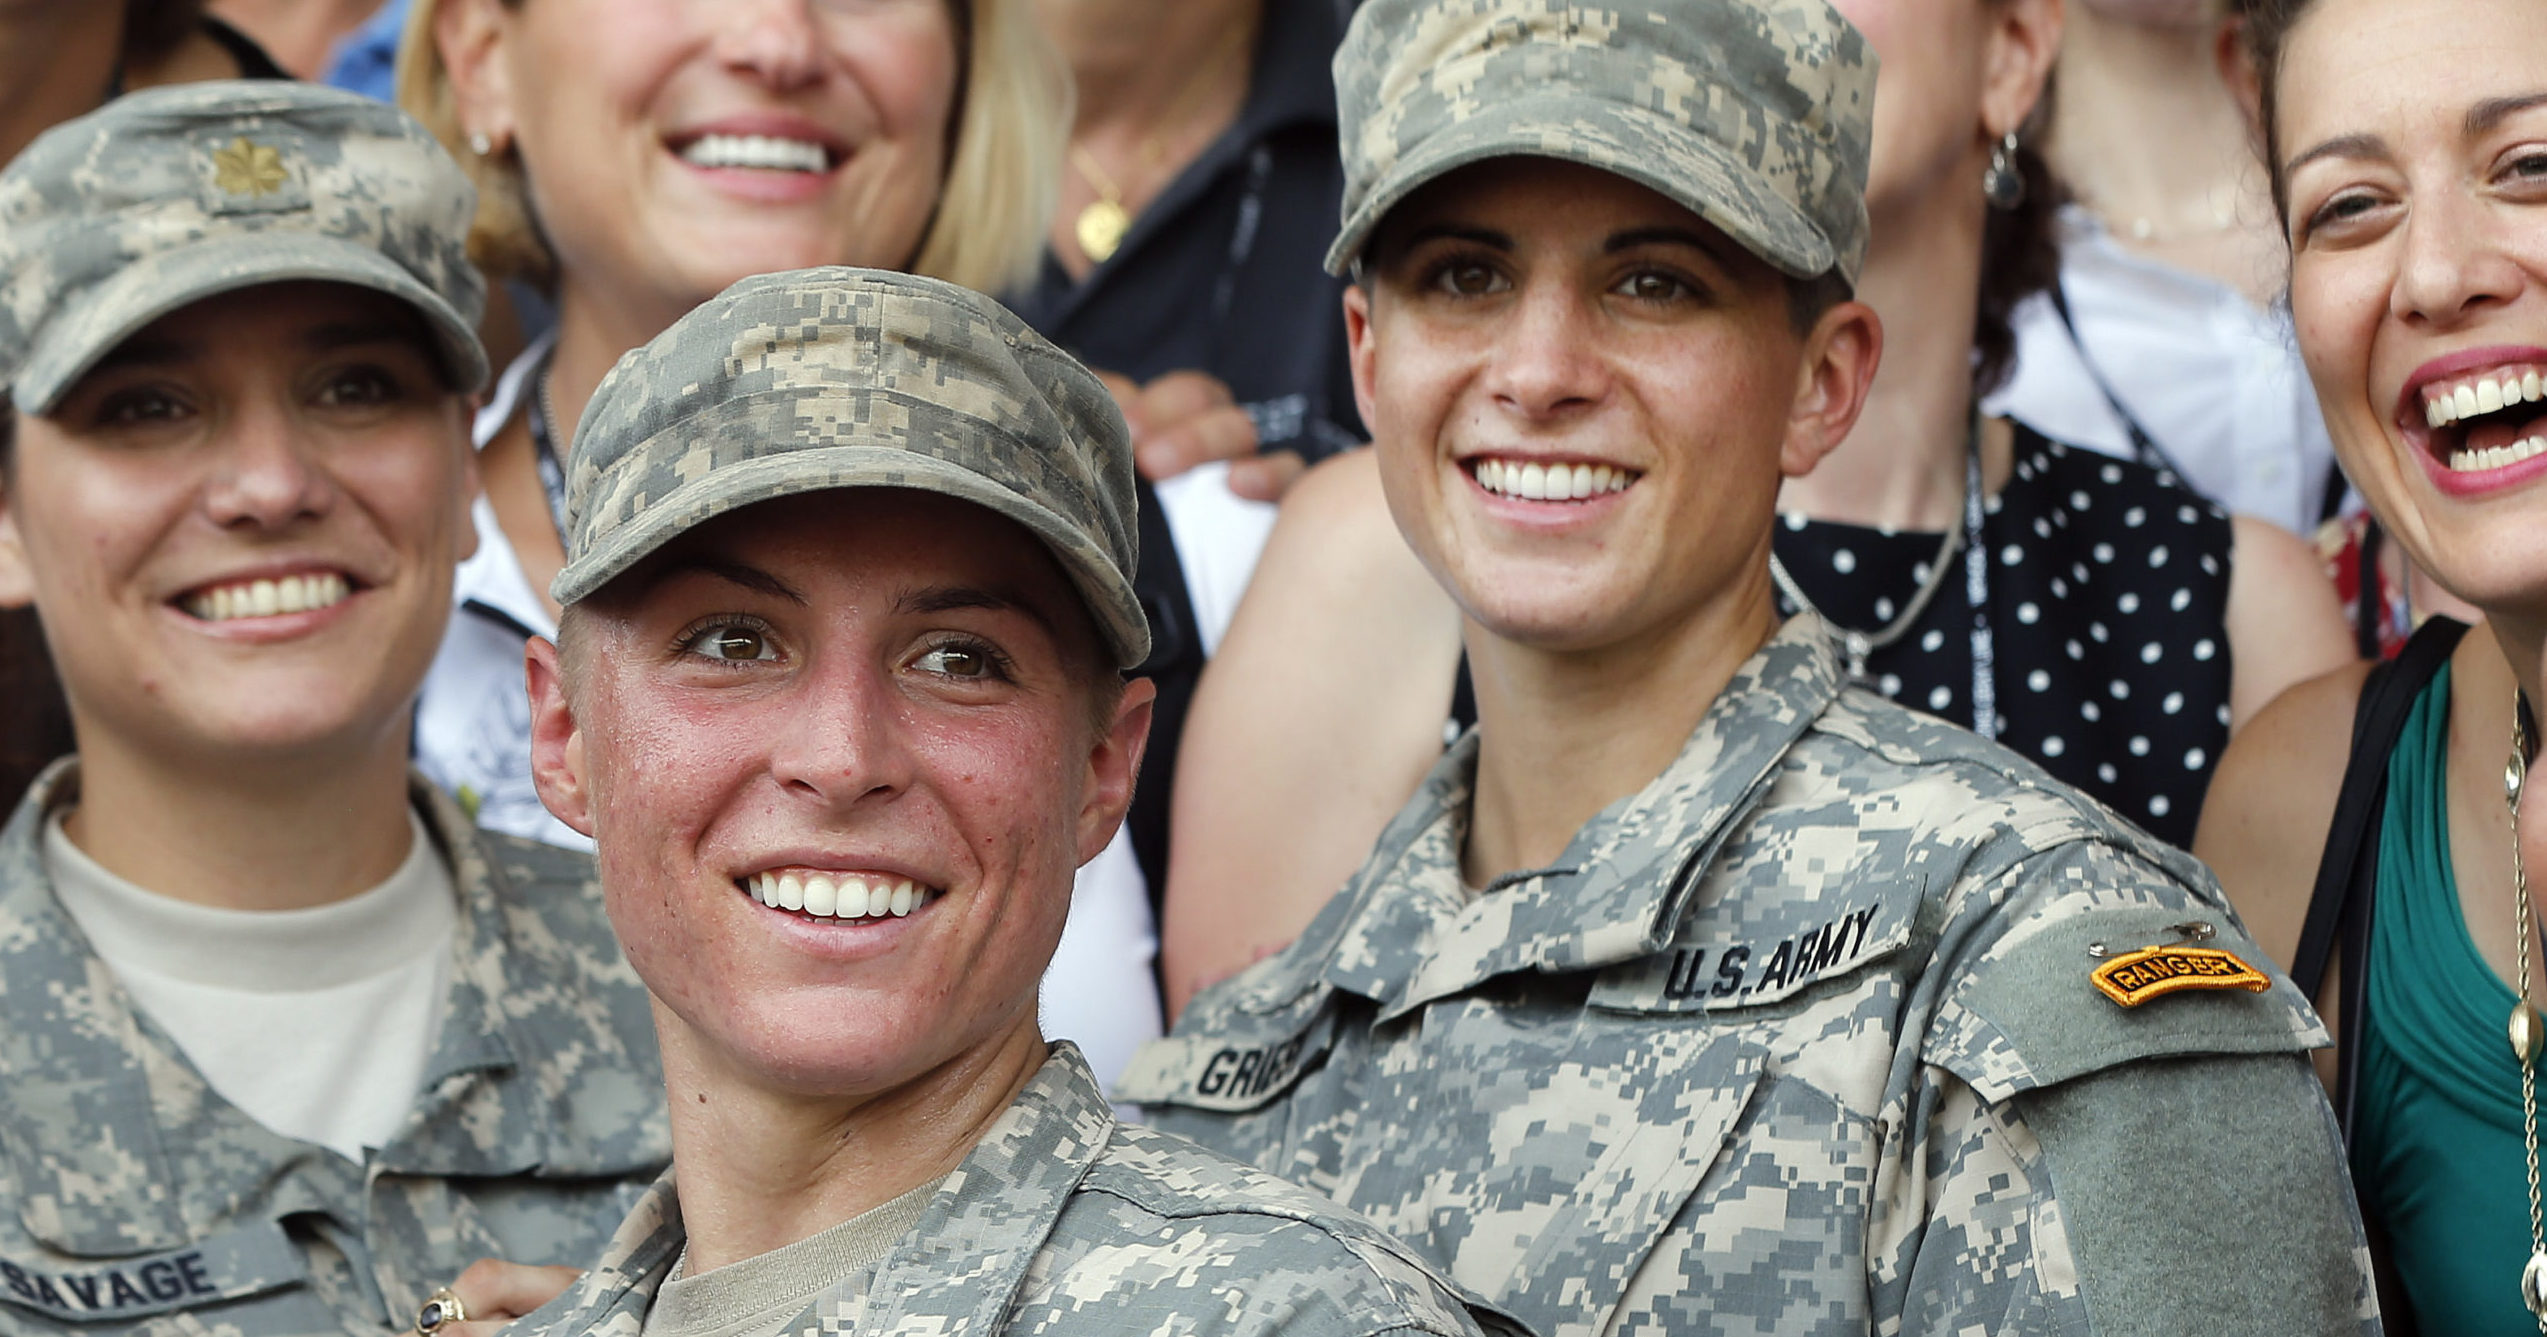 In this Aug. 21, 2015, file photo, Army 1st Lt. Shaye Haver, center, and Capt. Kristen Griest, right, pose for photos with other female West Point alumni after an Army Ranger school graduation ceremony at Fort Benning, Georgia. Haver and Griest became the first female graduates of the Army's rigorous Ranger School.